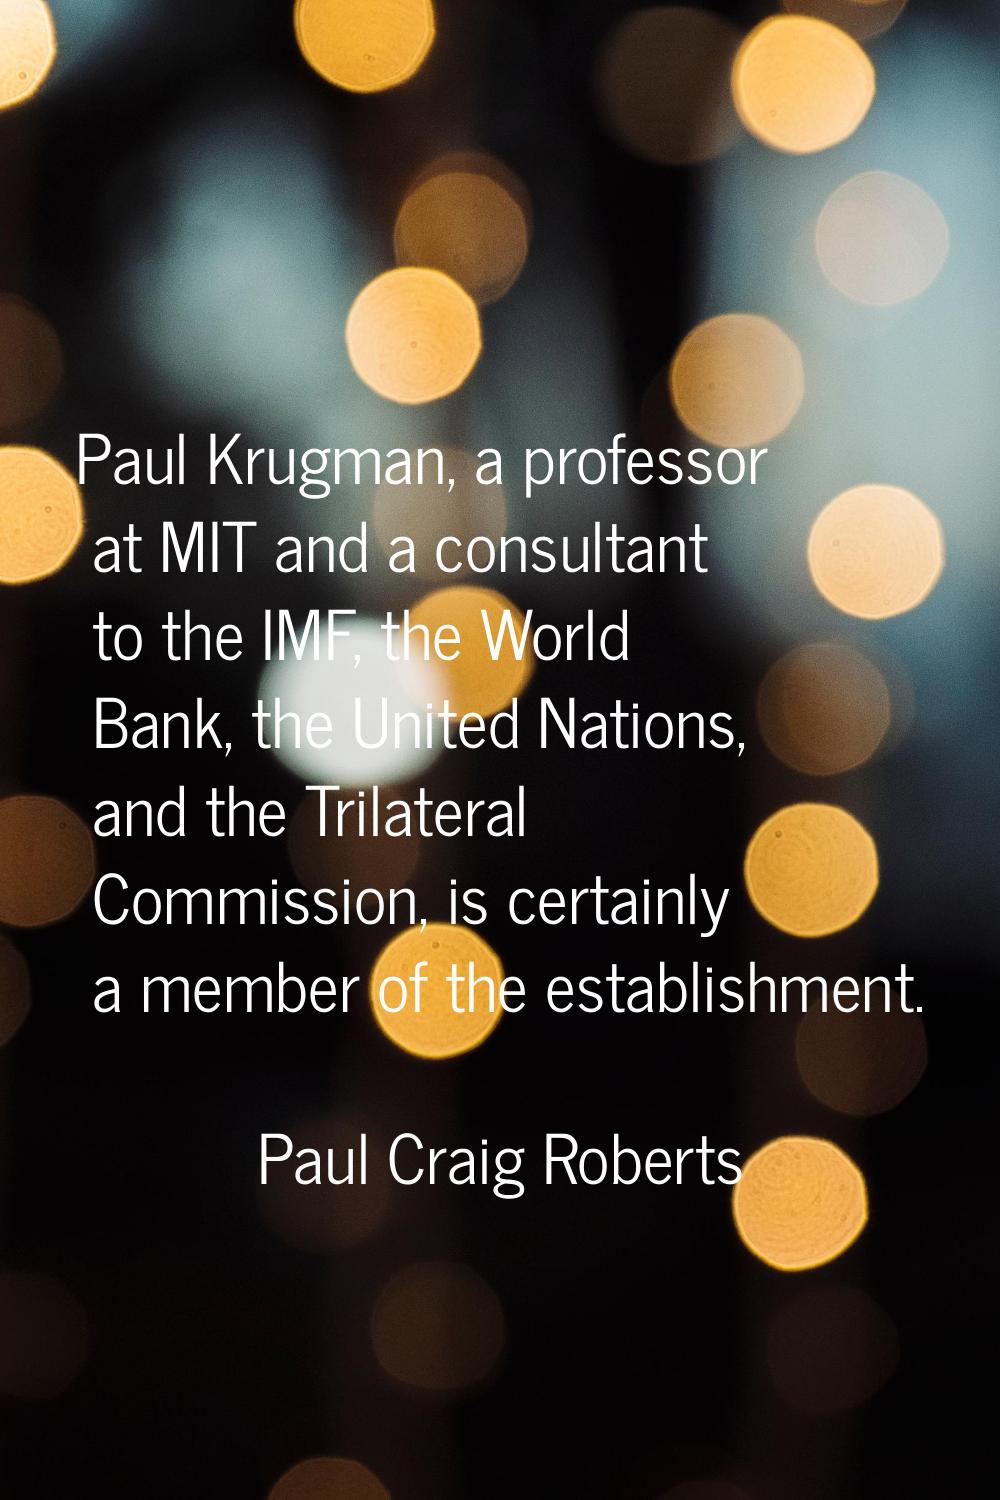 Paul Krugman, a professor at MIT and a consultant to the IMF, the World Bank, the United Nations, a